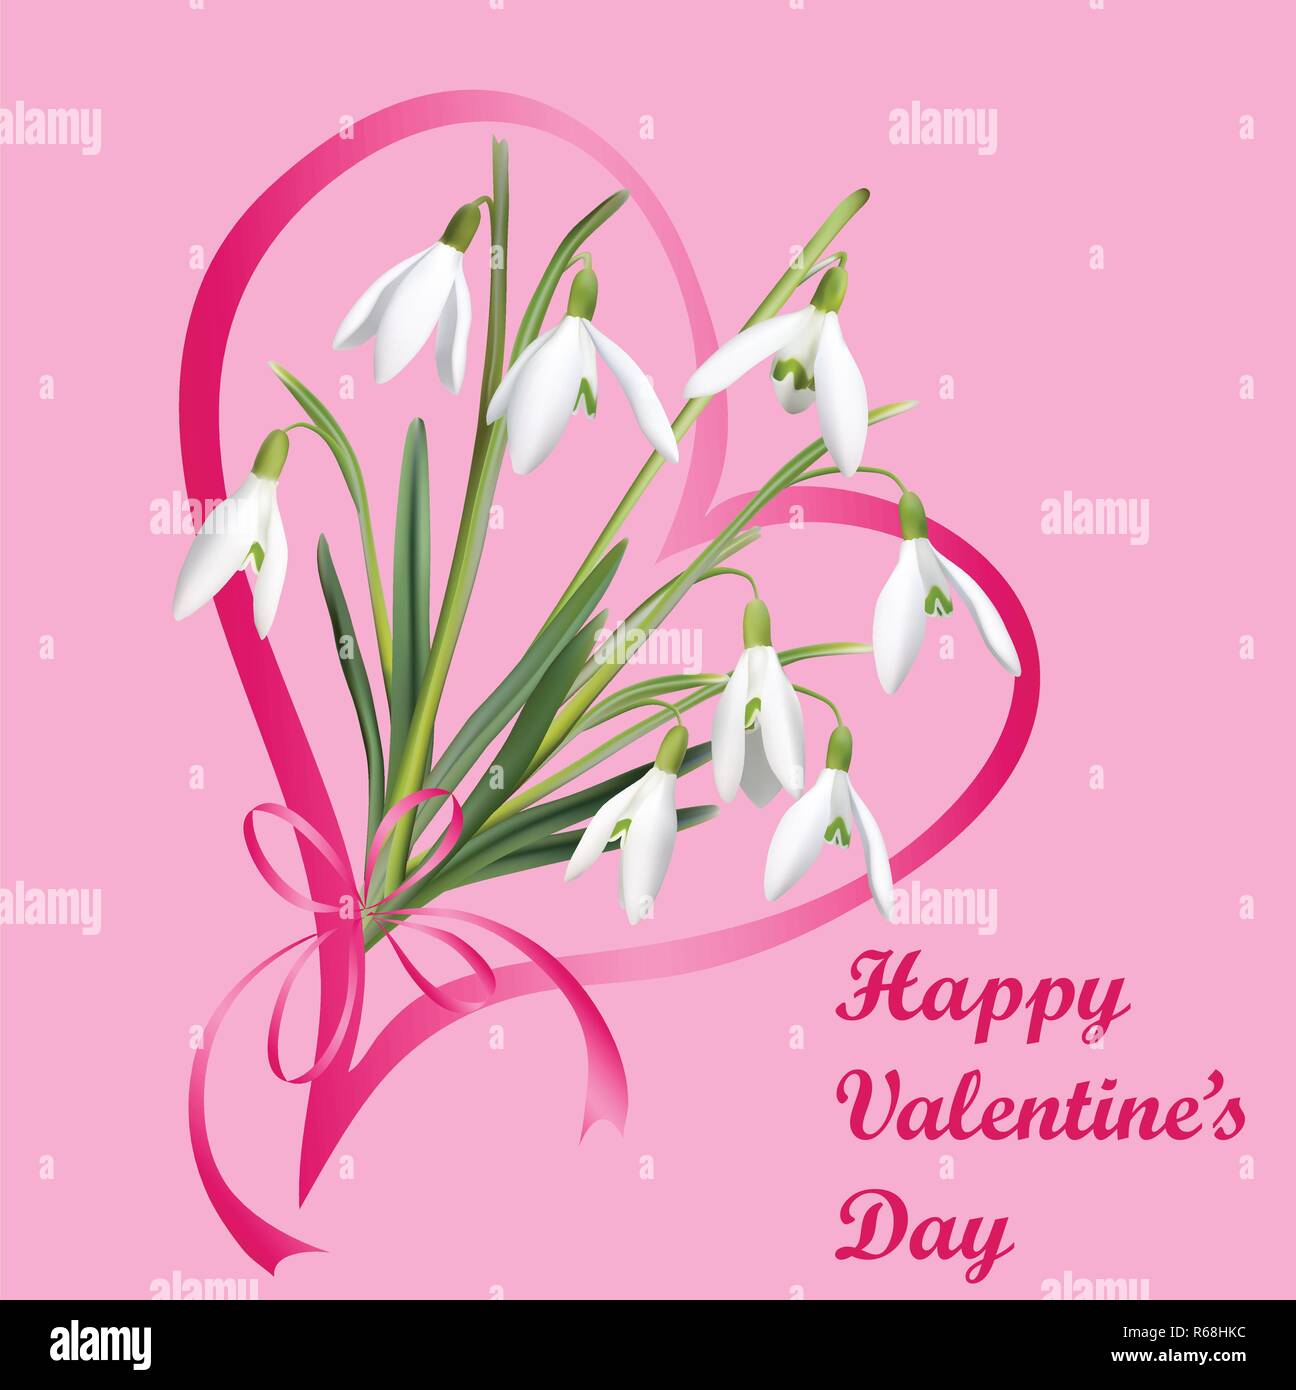 The first snowdrops Galanthus with Happy Valentine's Day gift card. Stock Vector